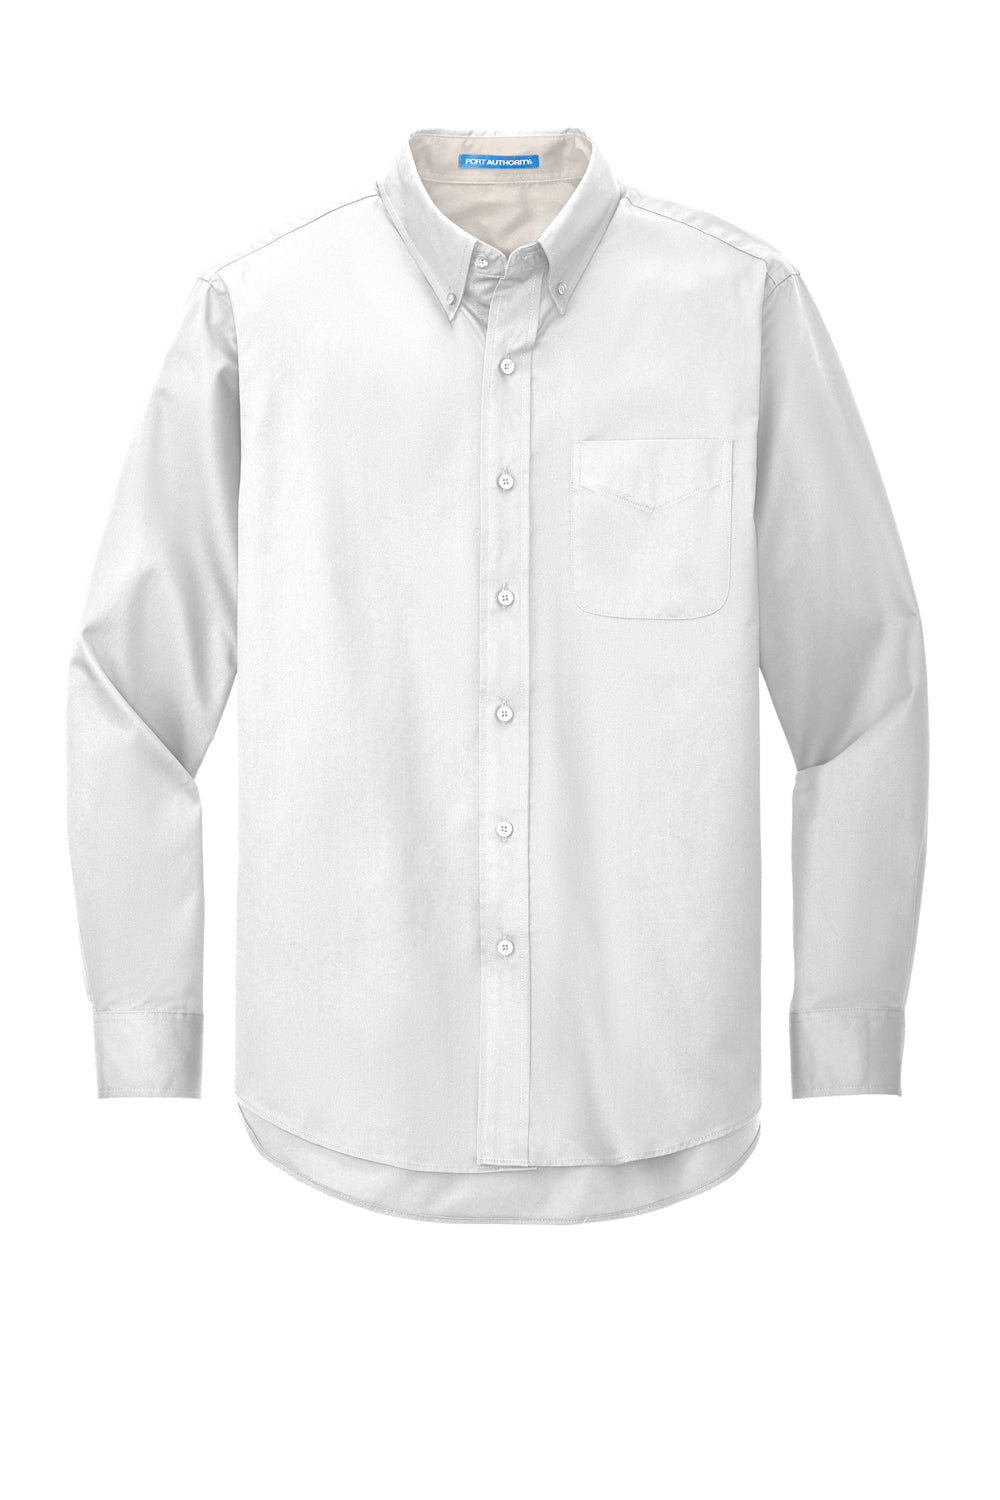 Port Authority S608/TLS608/S608ES Mens Easy Care Wrinkle Resistant Long Sleeve Button Down Shirt w/ Pocket White Flat Front